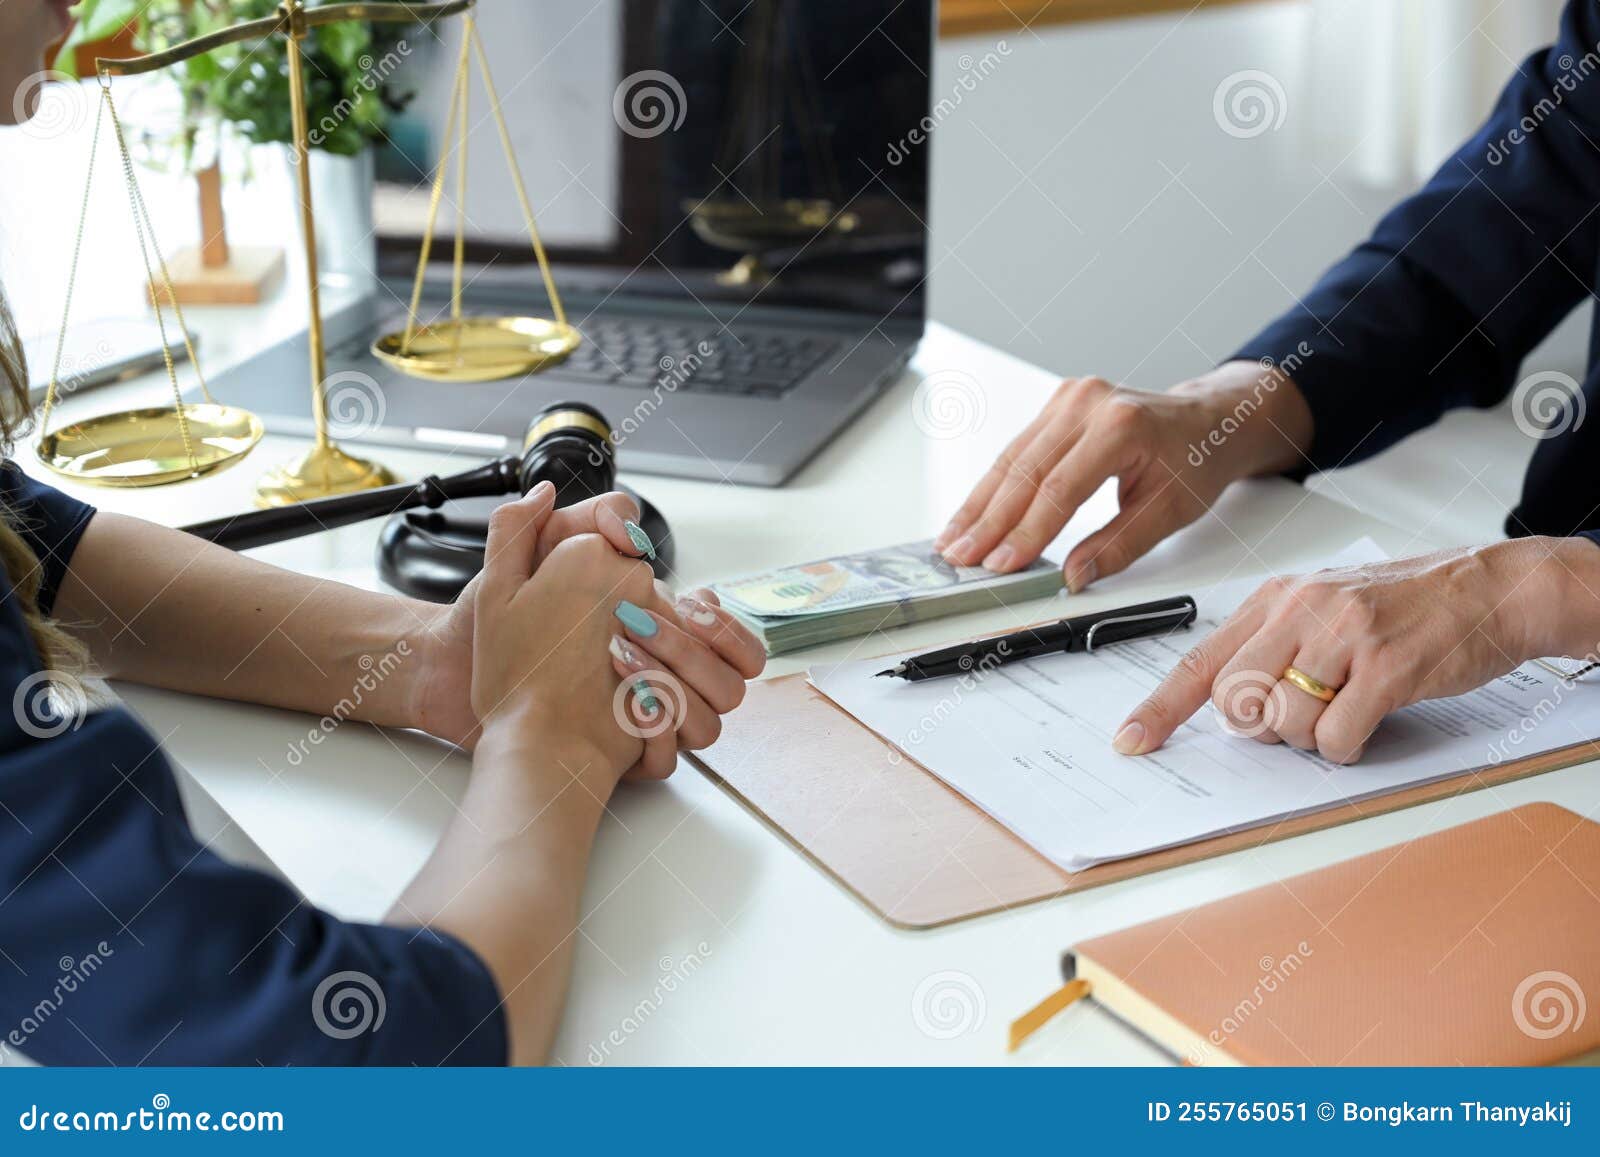 Female Lawyer Having a Meeting with Her Client To Sign the Agreement